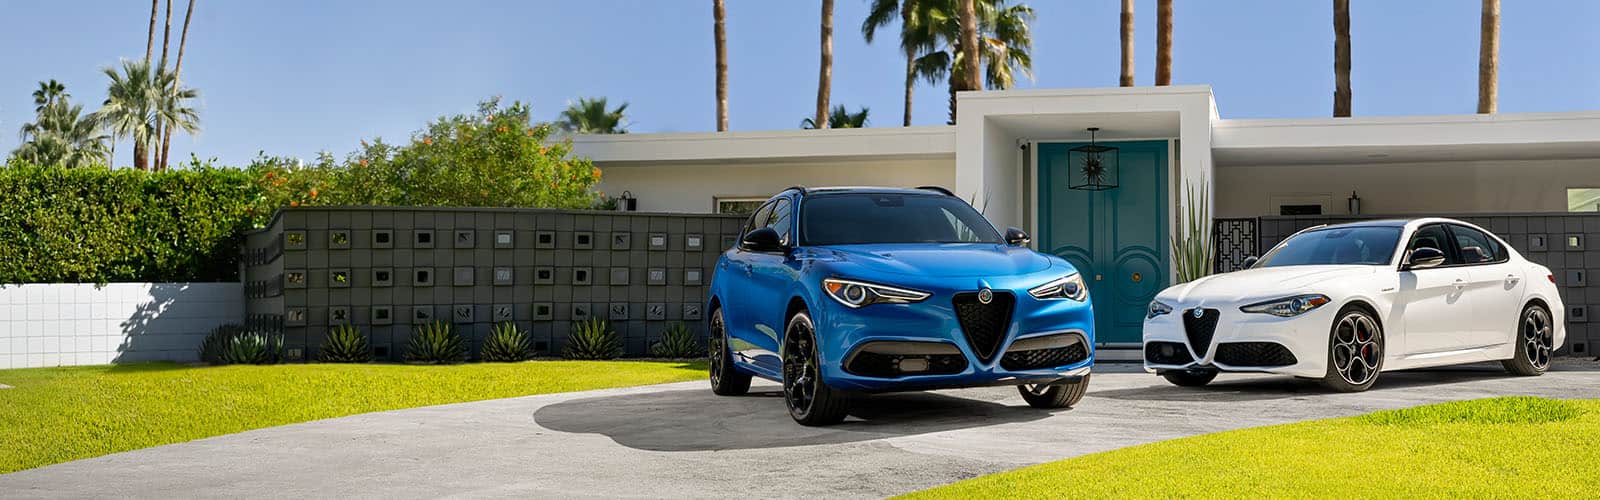 A blue 2022 Alfa Romeo Stelvio TBD and white 2022 Alfa Romeo Giulia TBD parked in the driveway of a contemporary home with palm trees in the background.